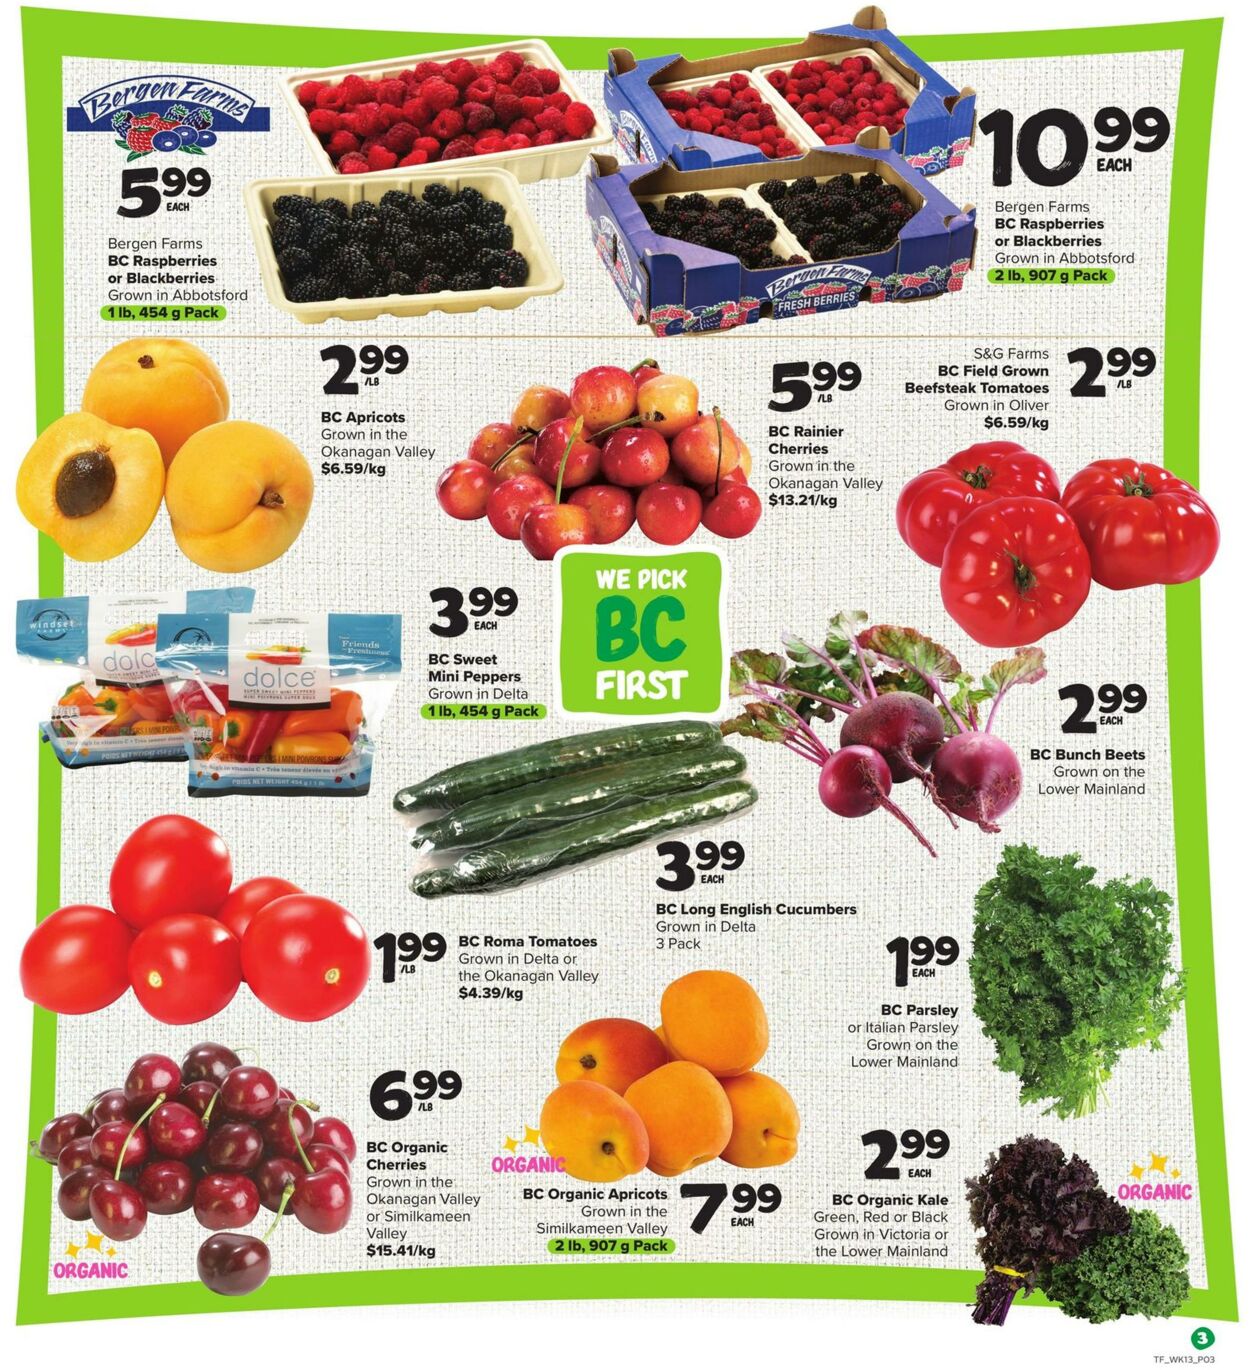 Flyer Thrifty Foods 28.07.2022 - 03.08.2022